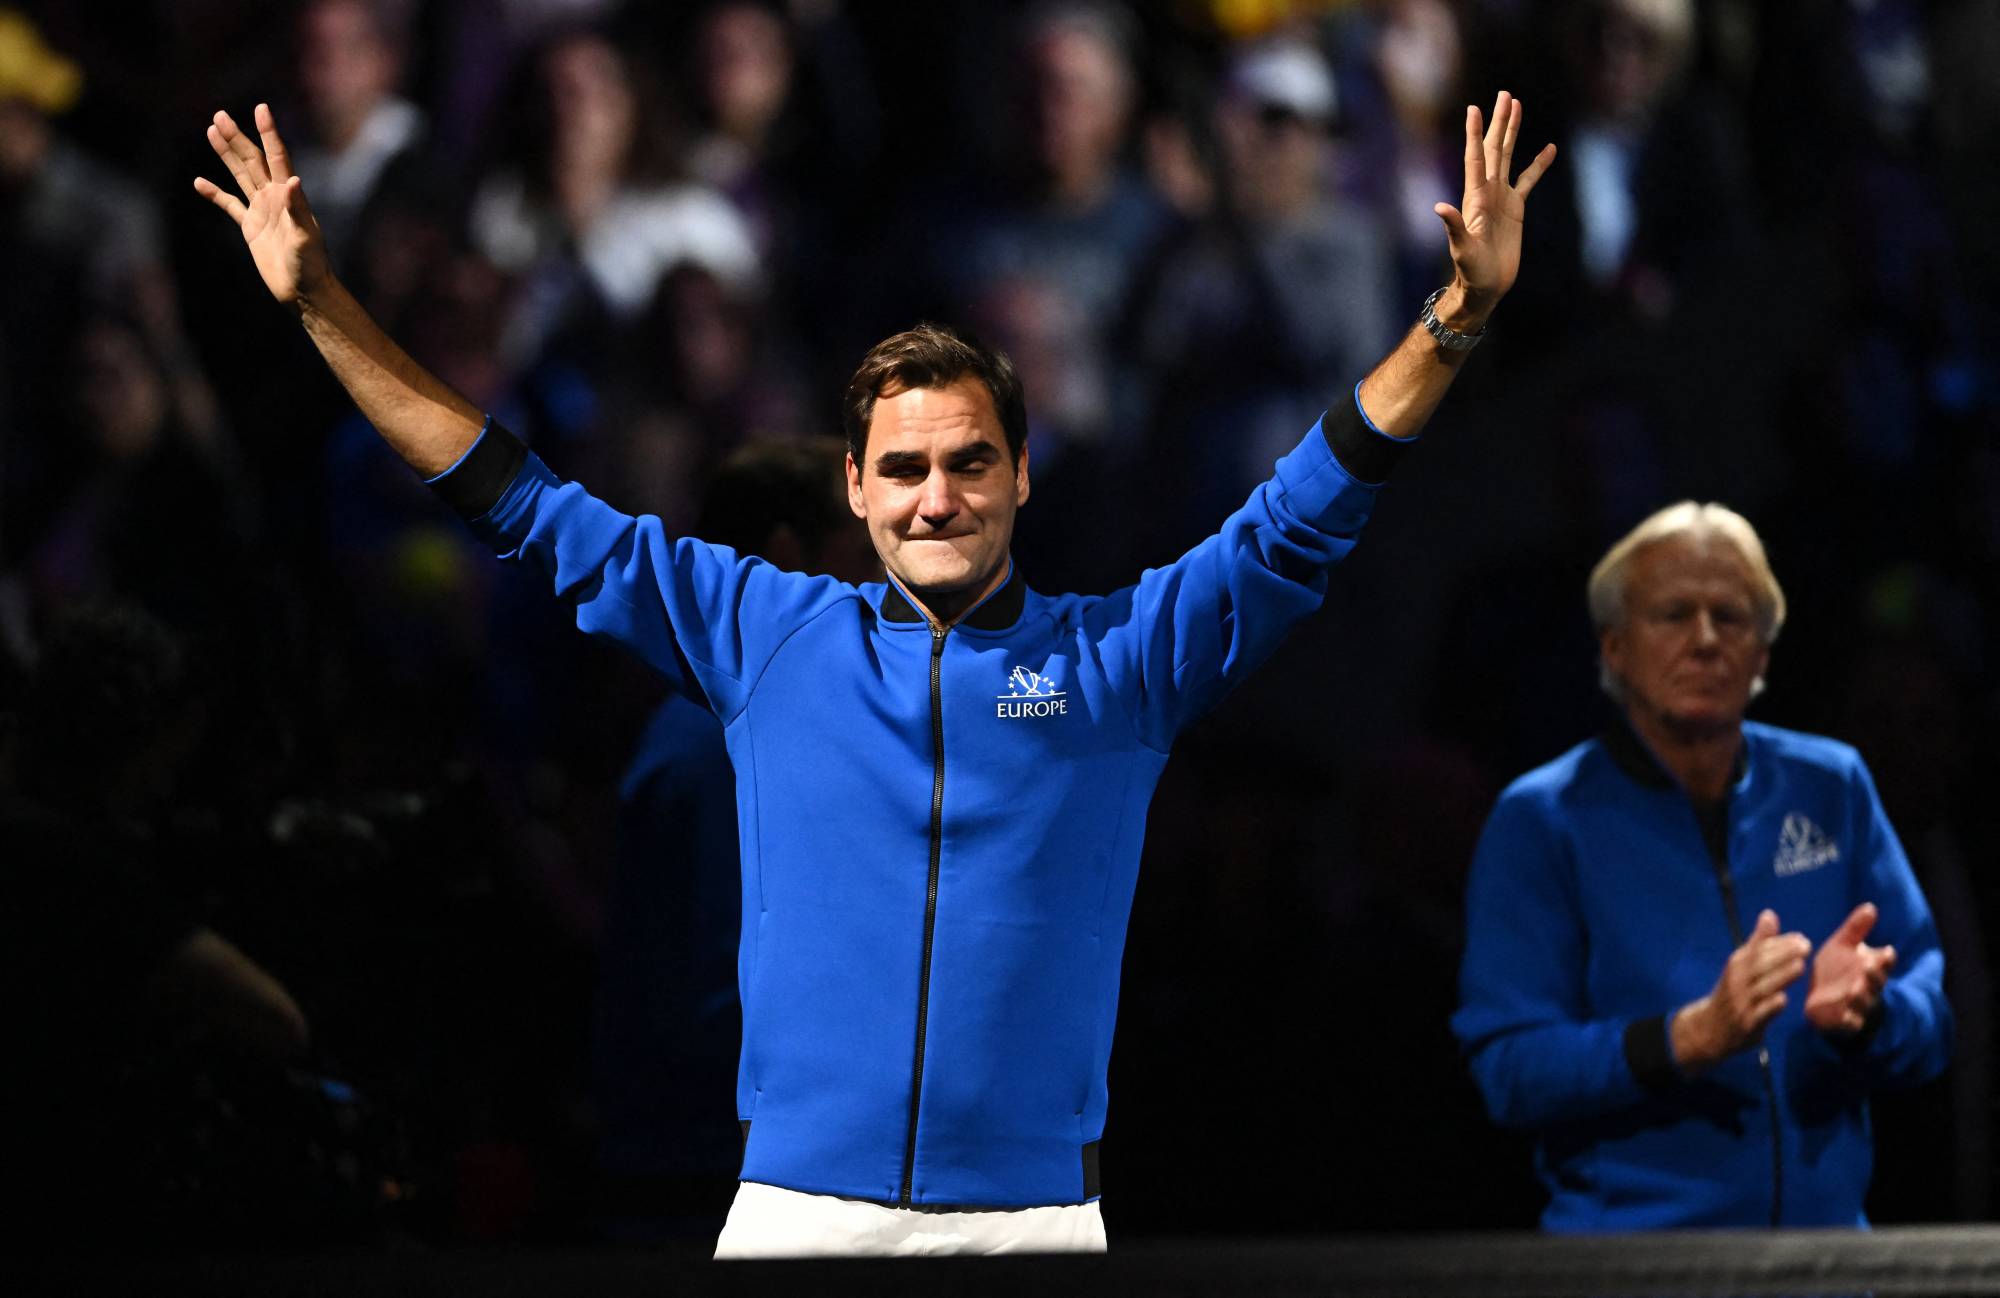 Roger Federer, even in defeat, gets fitting end to storied career